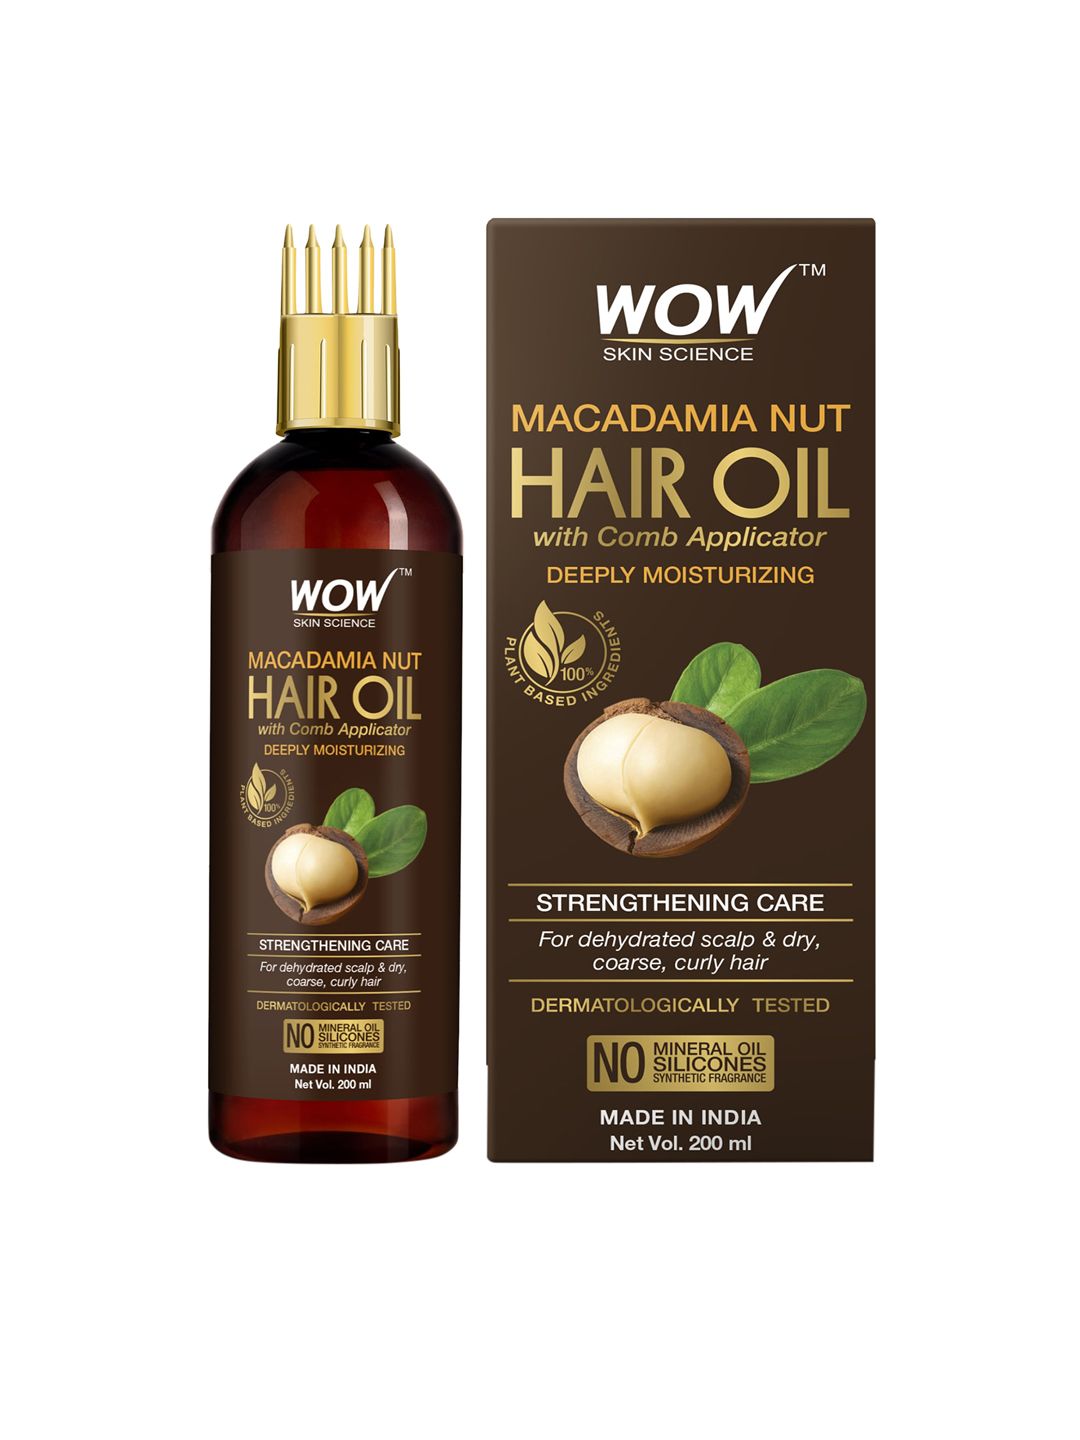 WOW SKIN SCIENCE Strengthening Care Macadamia Nut Hair Oil with Comb Applicator - 200 ml Price in India